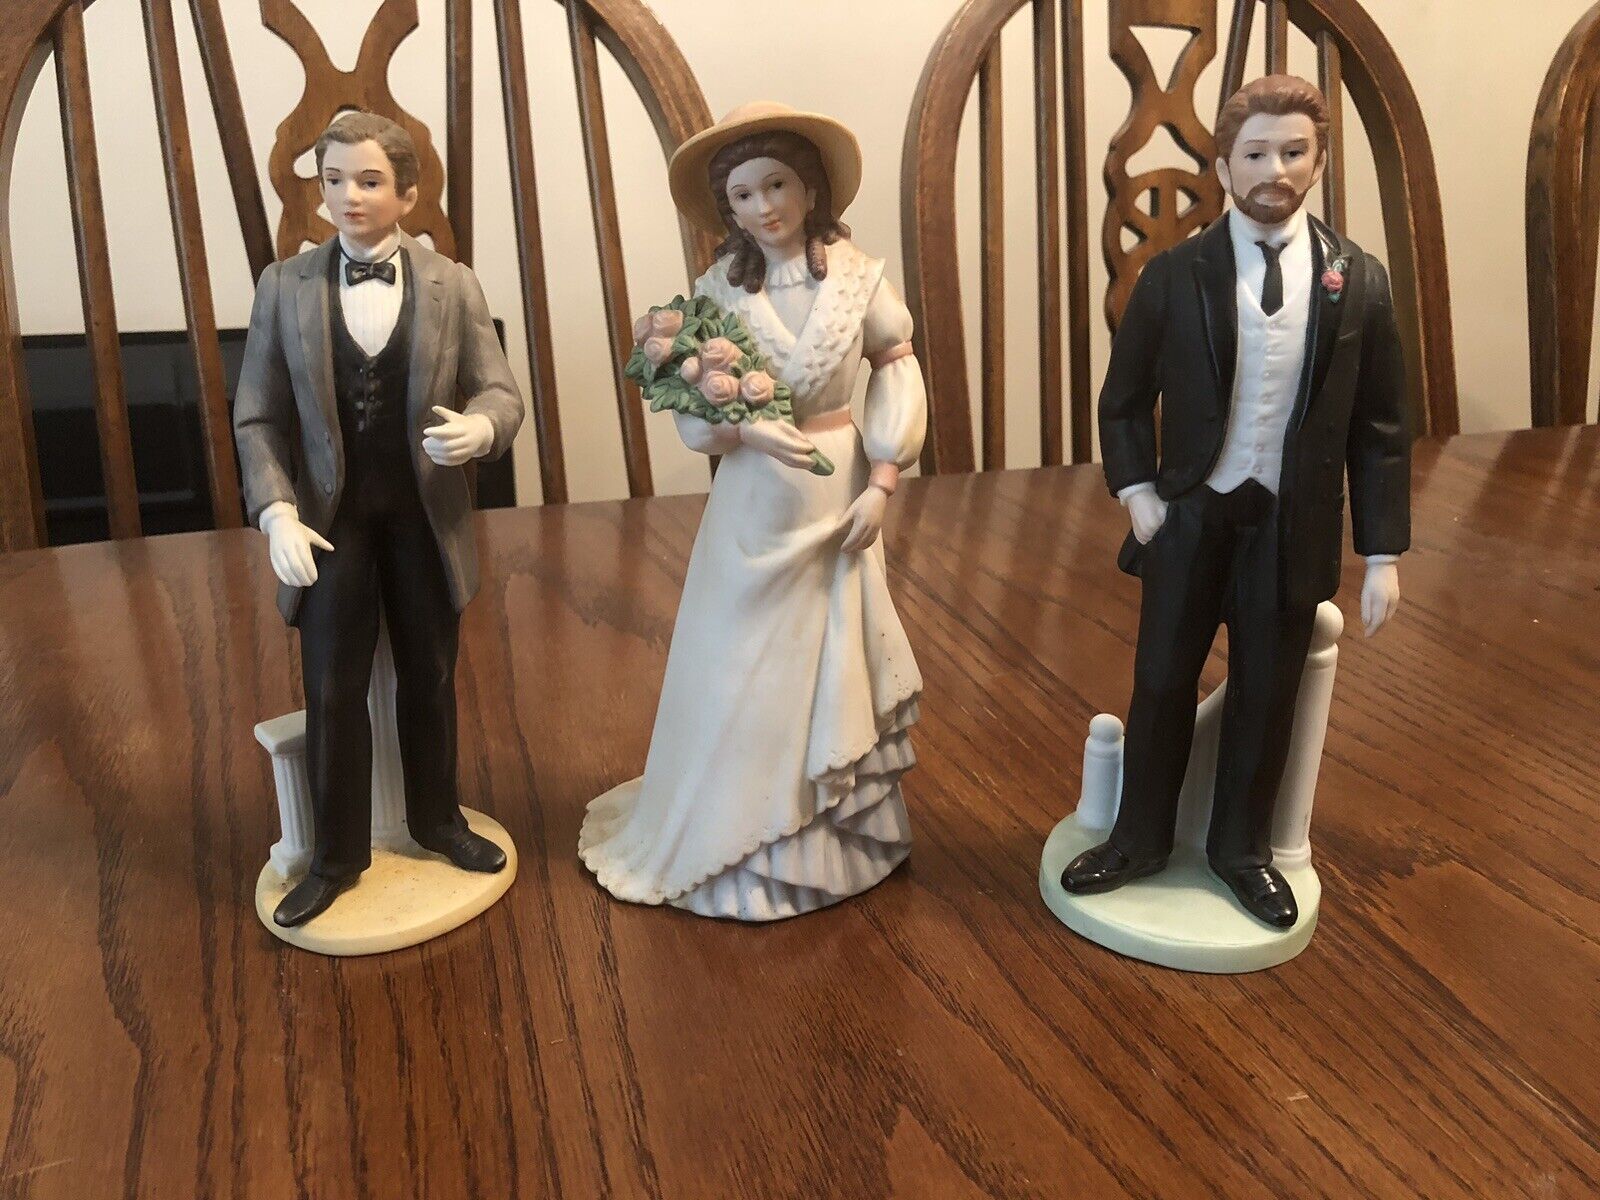 Lot Of 3 Home Interior Figurines 2 Men And 1 Lady